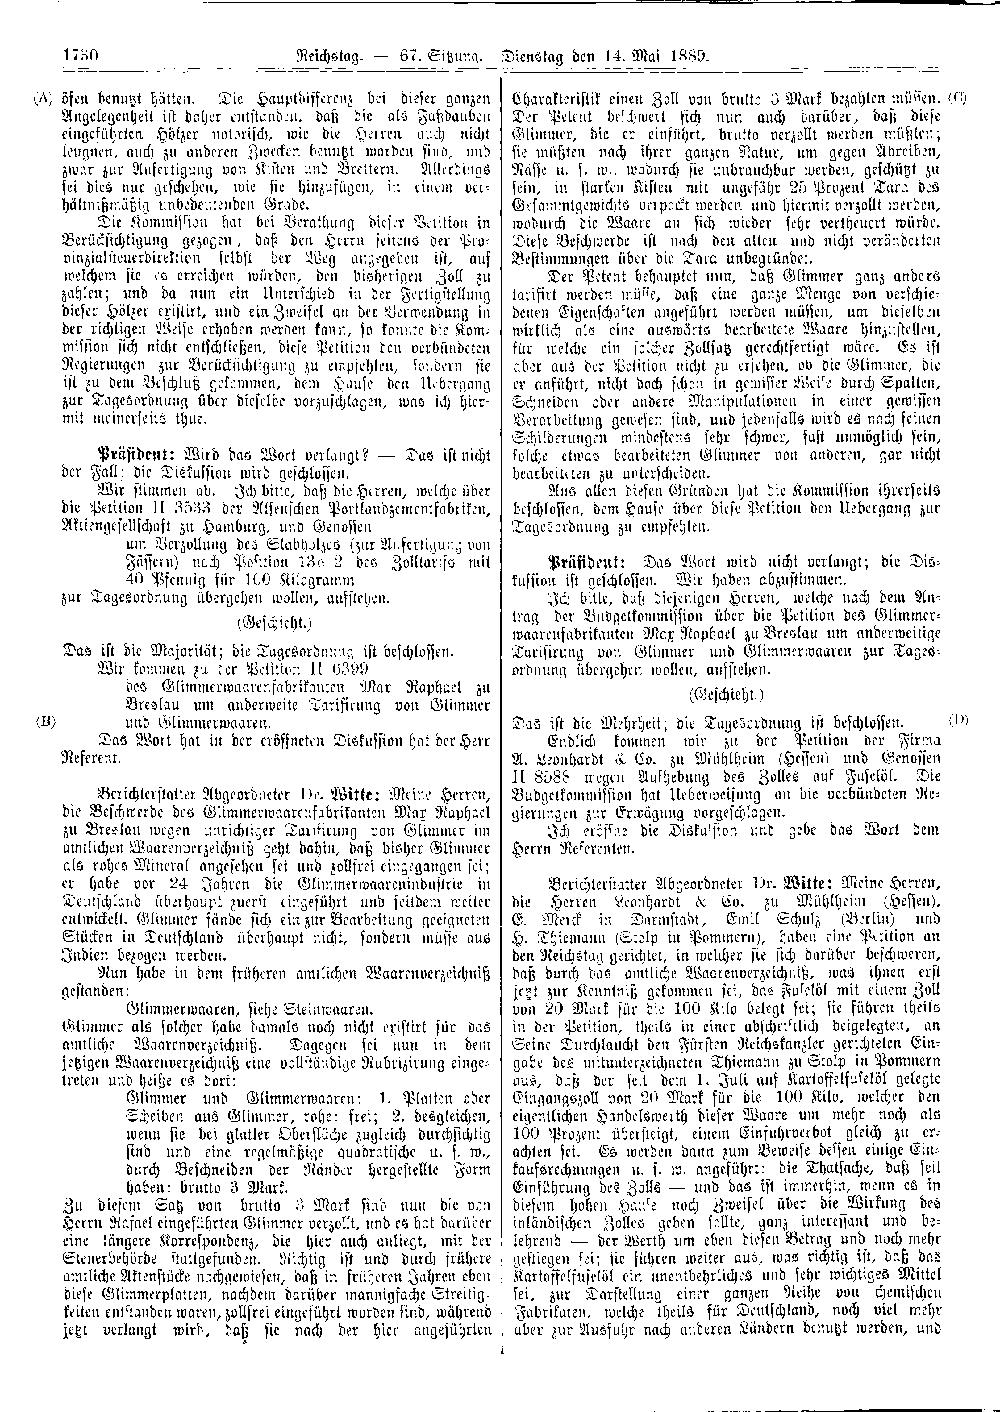 Scan of page 1730